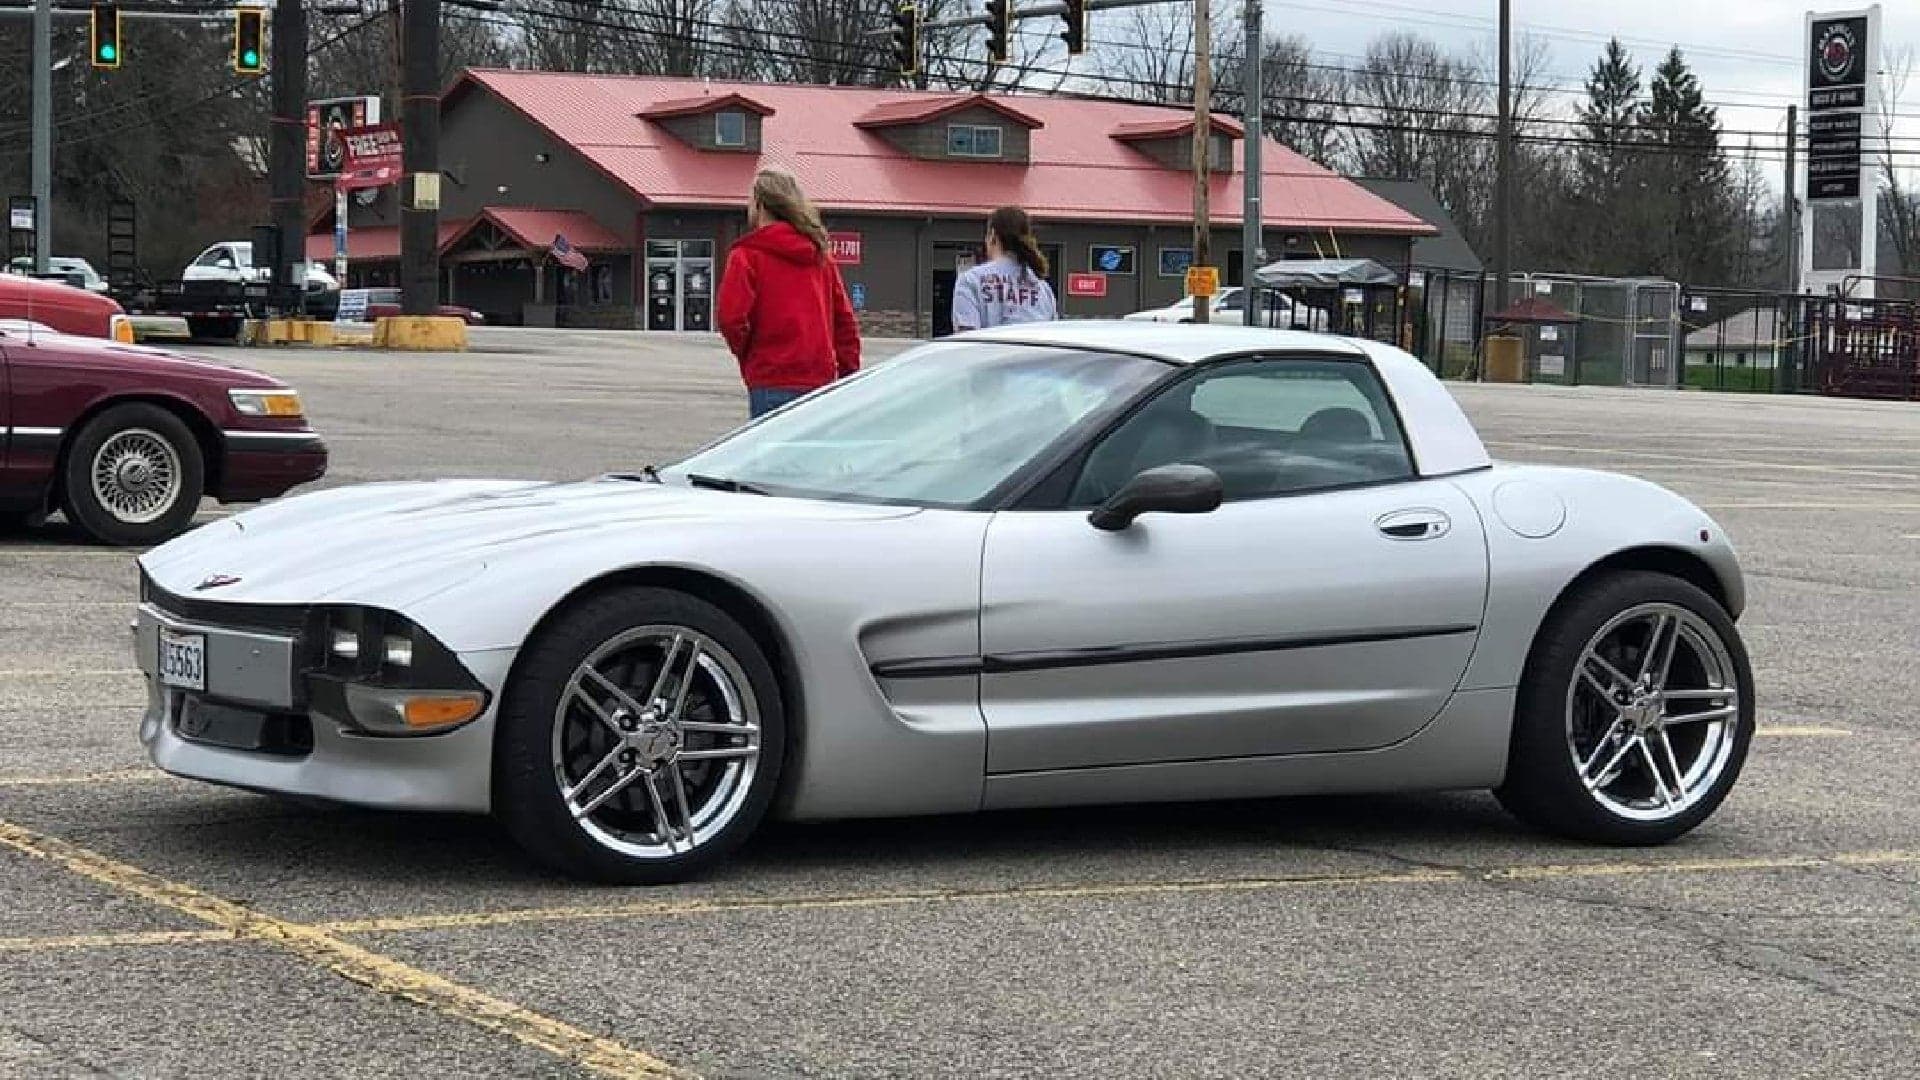 This Bizarre Shorty C5 Corvette Hot Rod Might Not Be so Bad